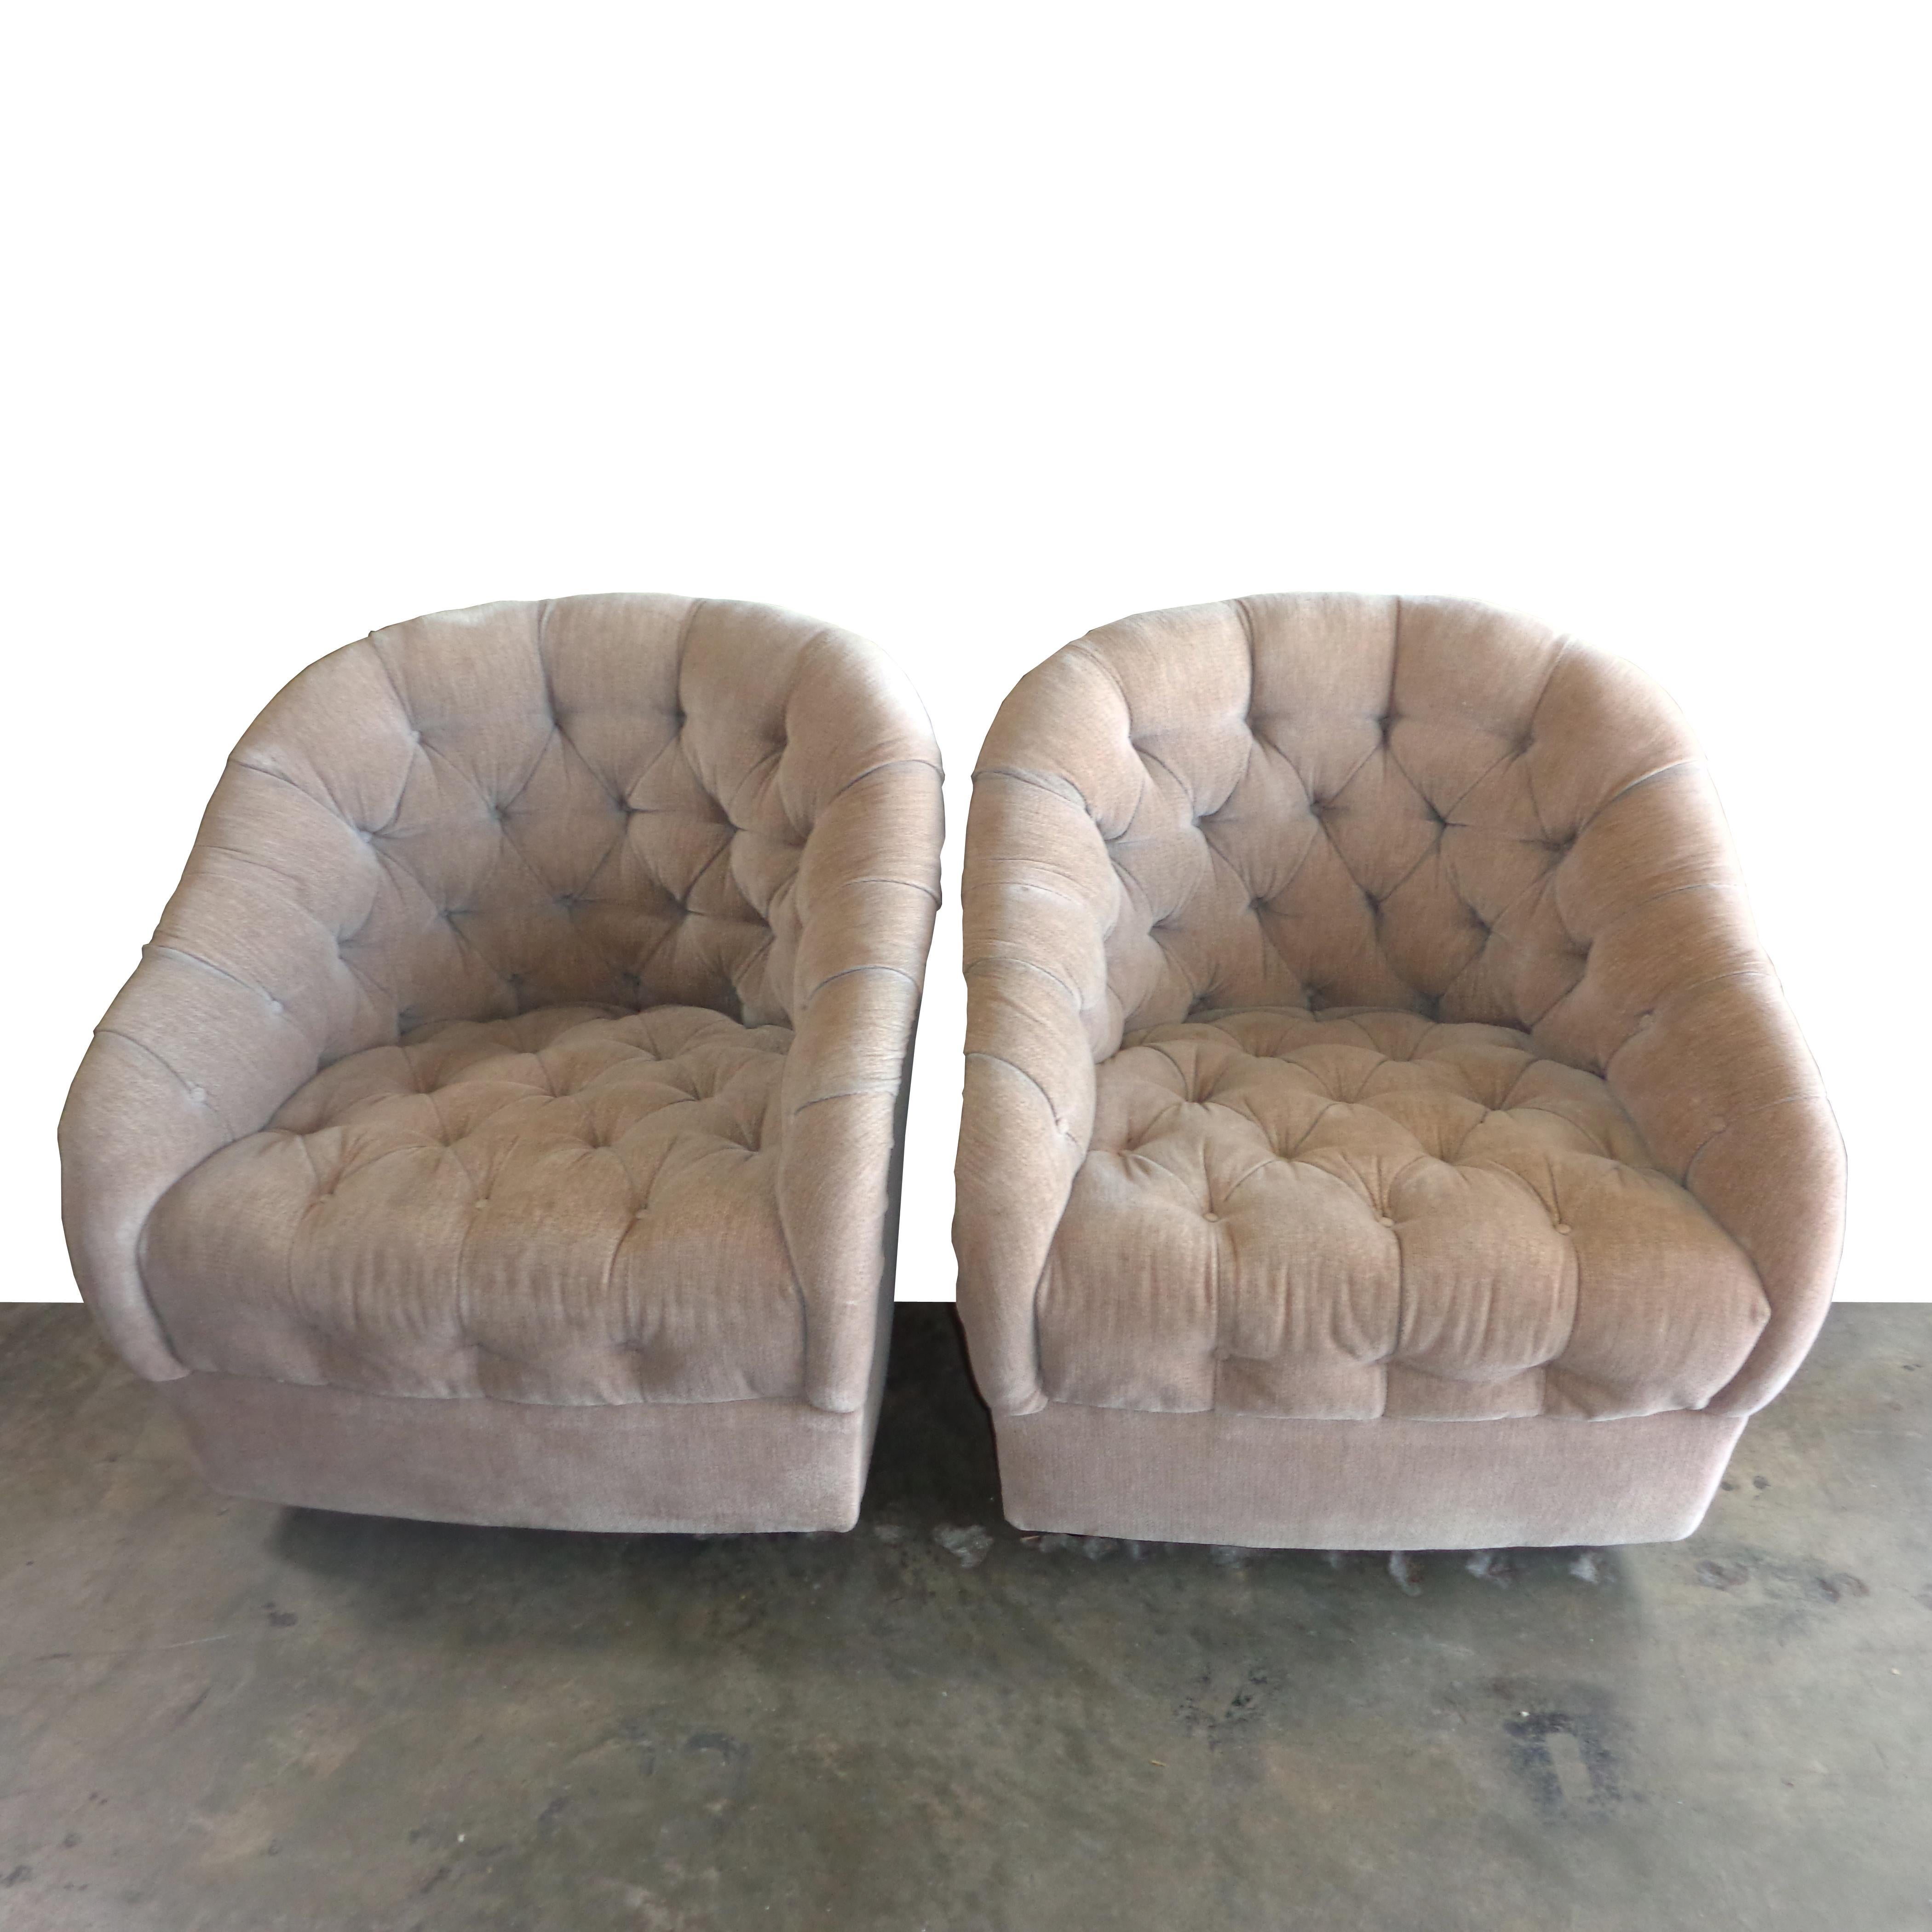 Pair of Ward Bennett tufted club chairs


Barrel back lounge chairs with deep button tufting. Extremely comfortable.
By Ward Bennett for Brickel Associates, American, circa 1970.


Measures: Height 31.5